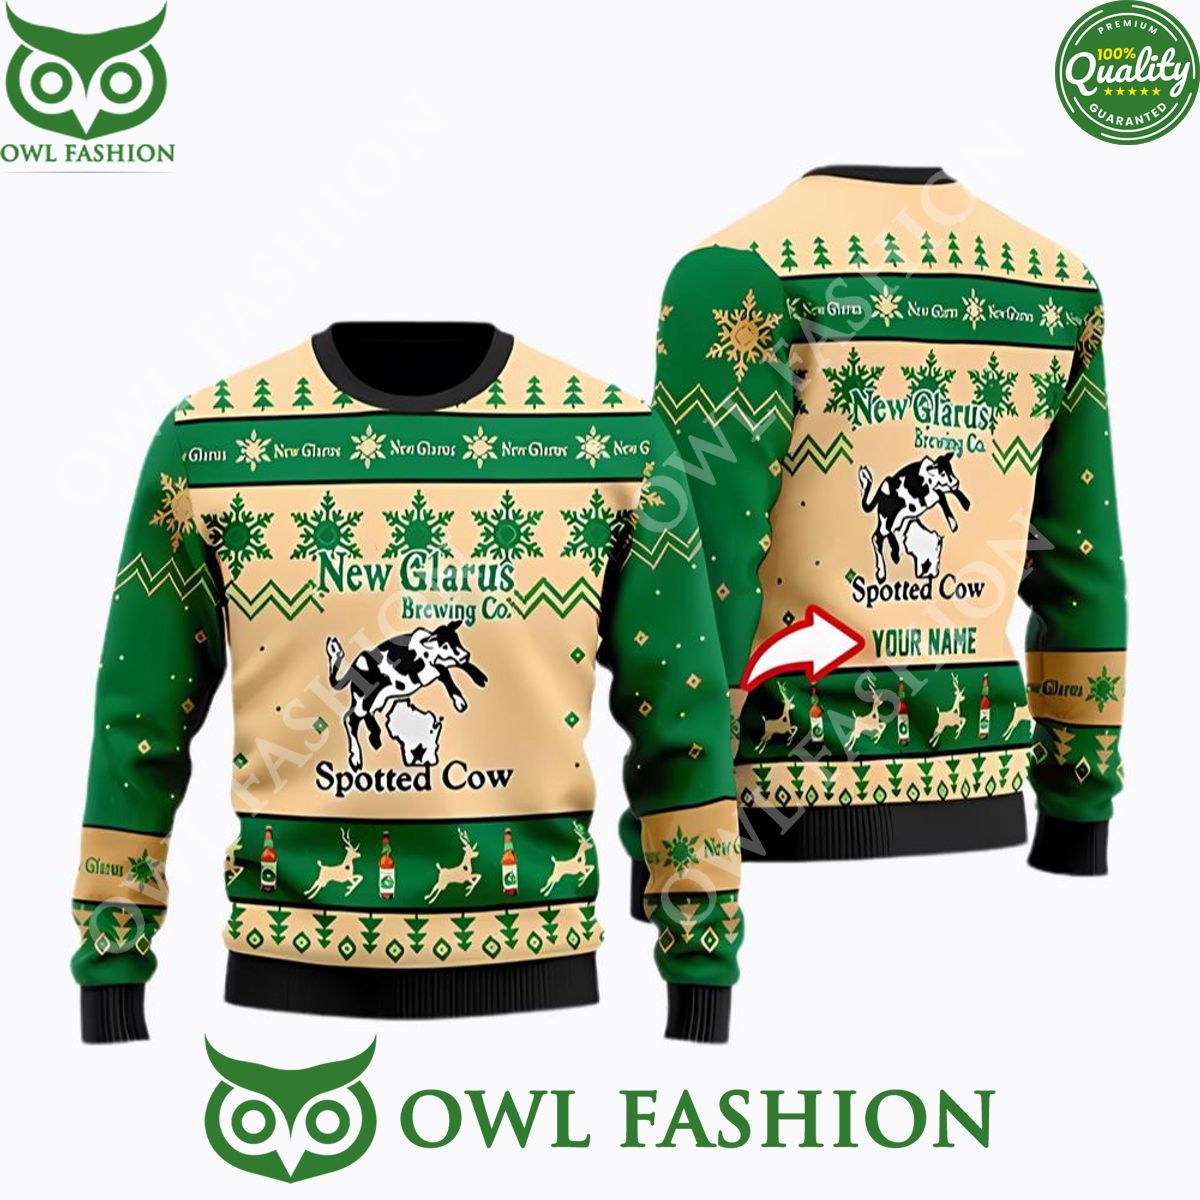 spotted cow beer personalized christmas sweater jumpers 1 GvjNO.jpg